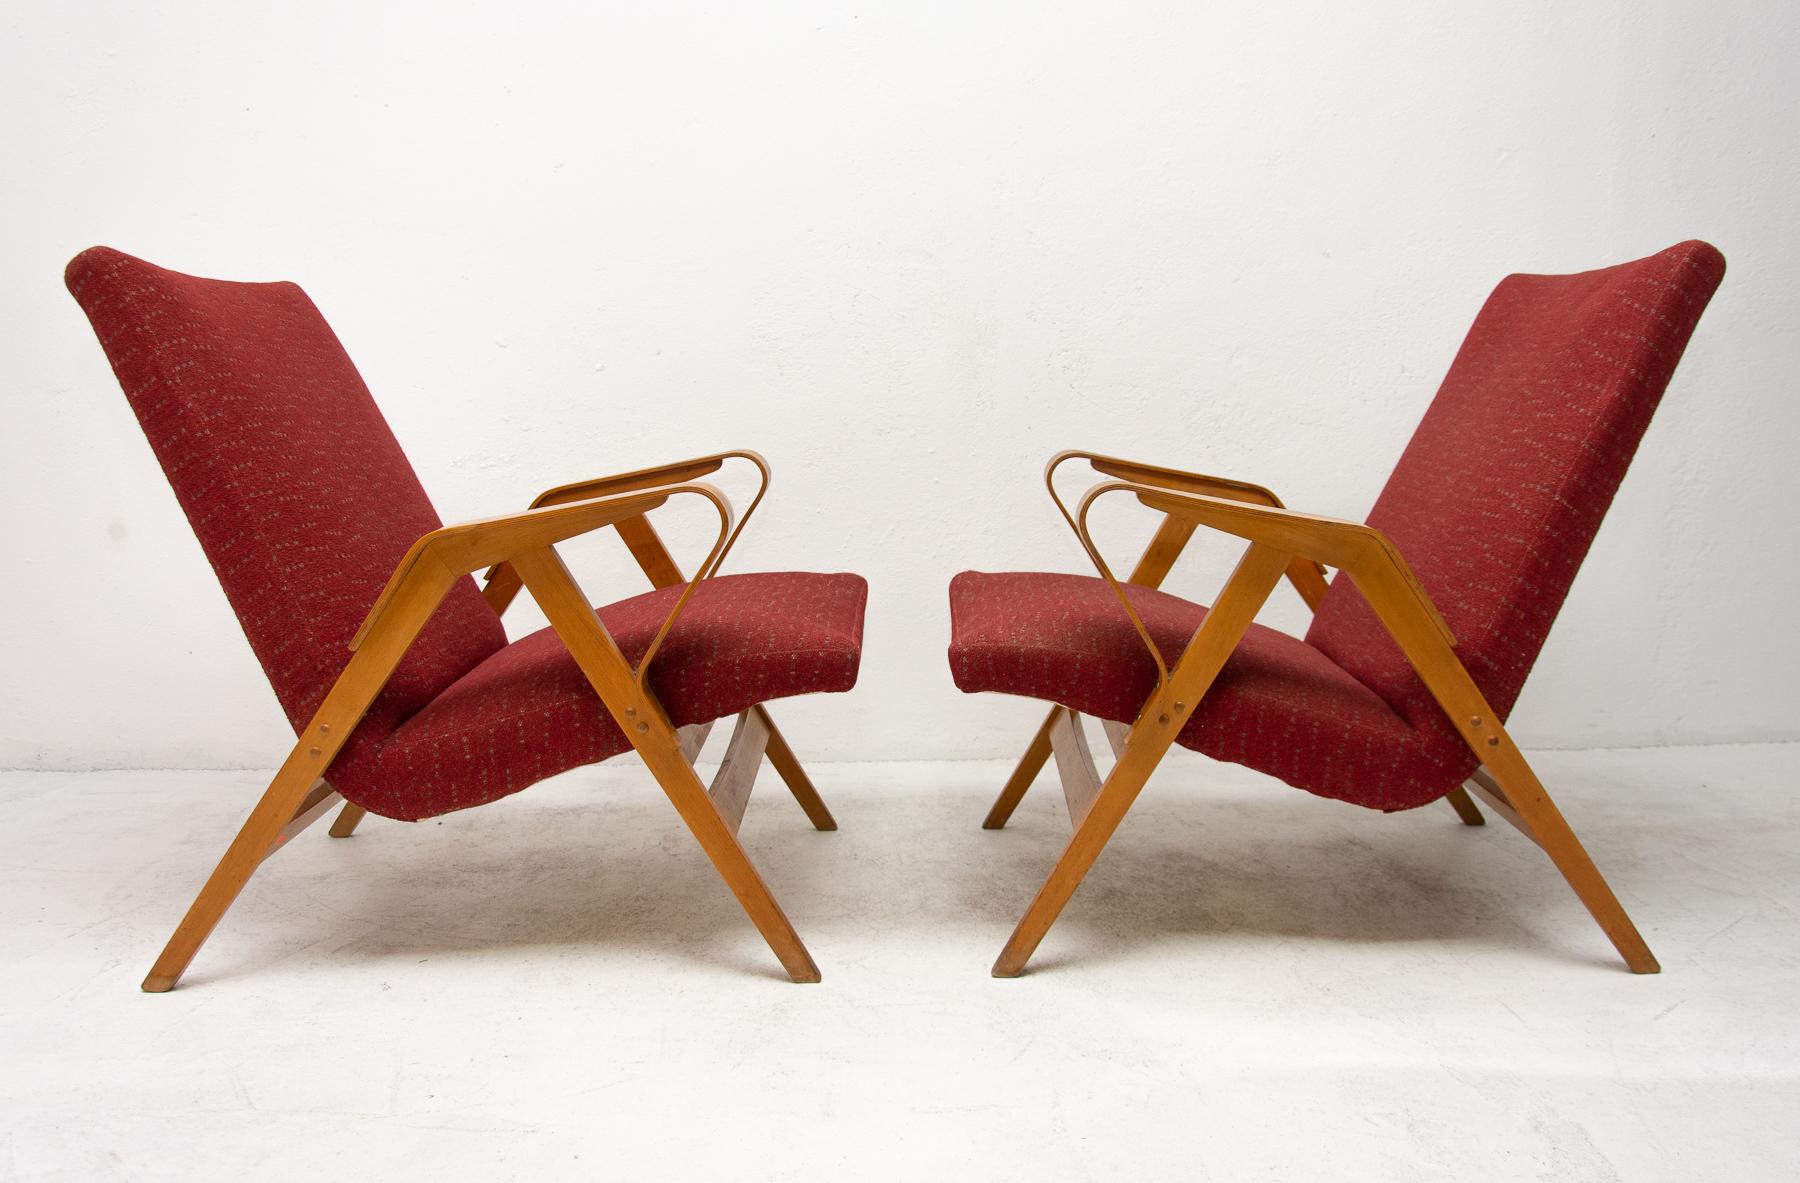 These Czechoslovak lounge armchairs were designed by František Jirák for Tatra Nabytok in the former Czechoslovakia in the 1960s. The design of these chairs followed the huge success of the Czechoslovak pavilion at the Brussels Expo 58.
The